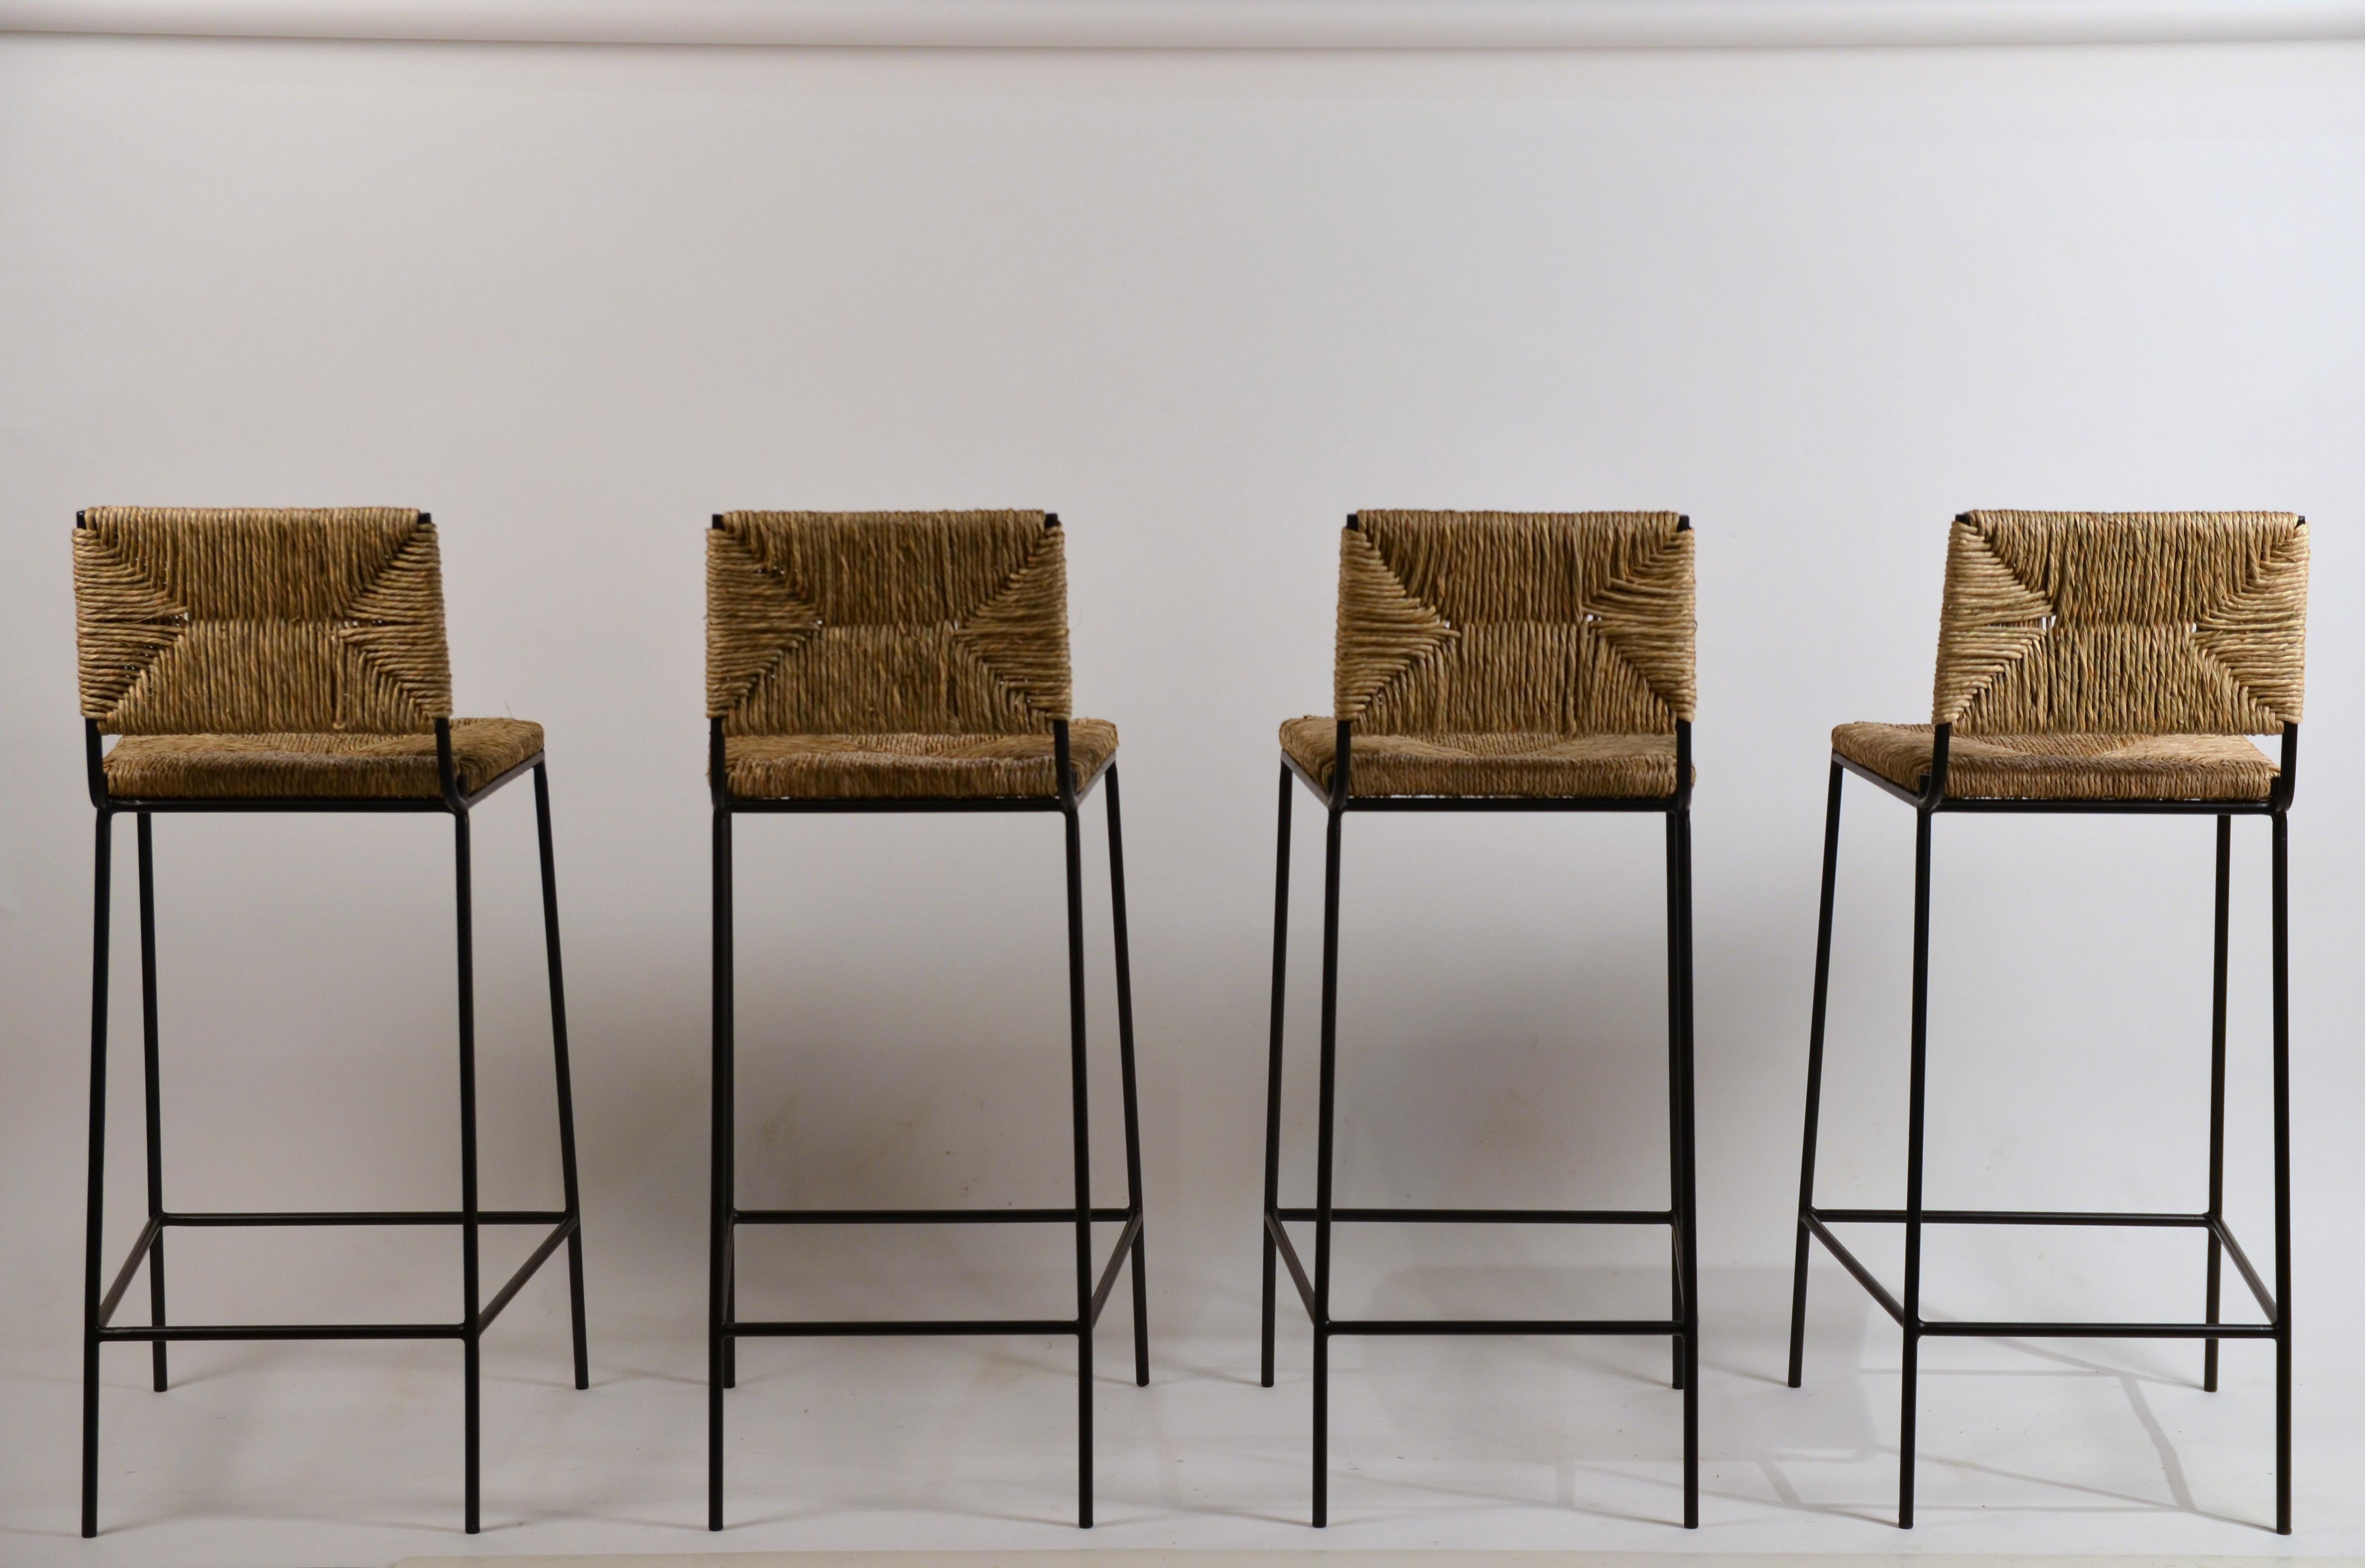 Set of 4 'Campagne' steel and rush counter stools by Design Frères.

Chic combination of slender but sturdy powder coated steel frames with handwoven rush seats and backs.

Support under the rush seat for durability.

Plastic caps on the feet